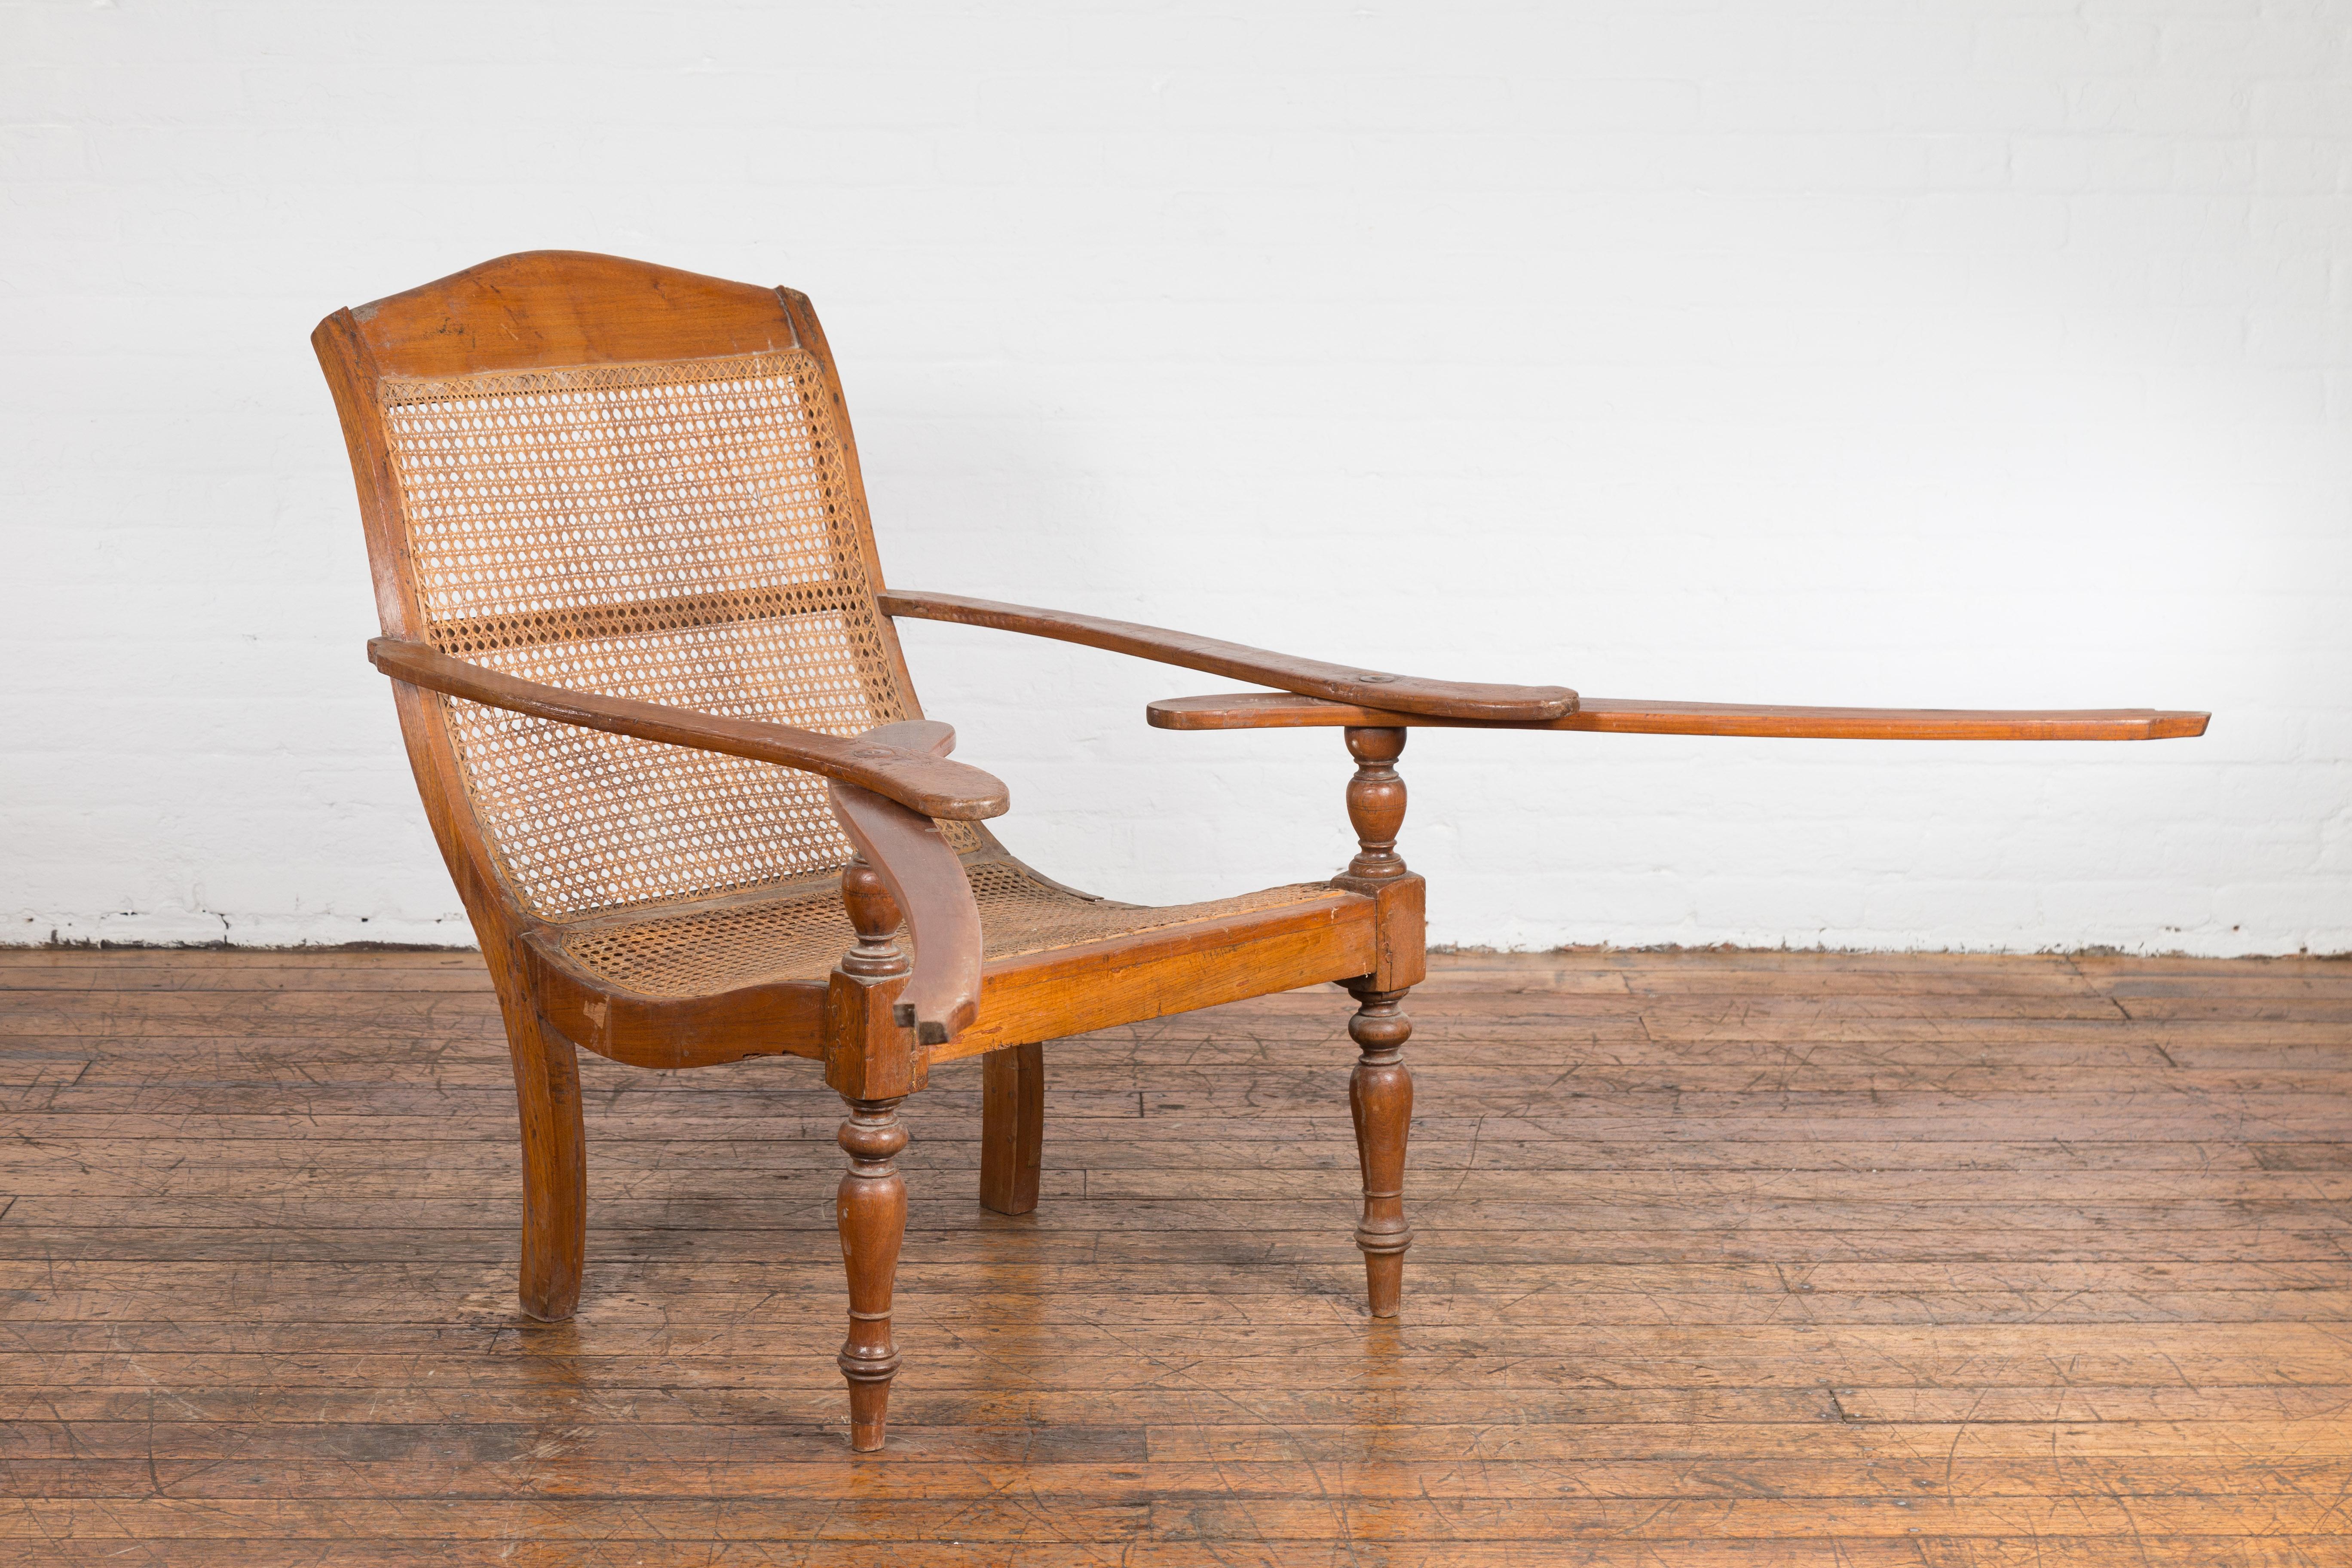 Dutch Colonial Indonesian Cane and Wood Plantation Chair with Extending Arms In Good Condition For Sale In Yonkers, NY